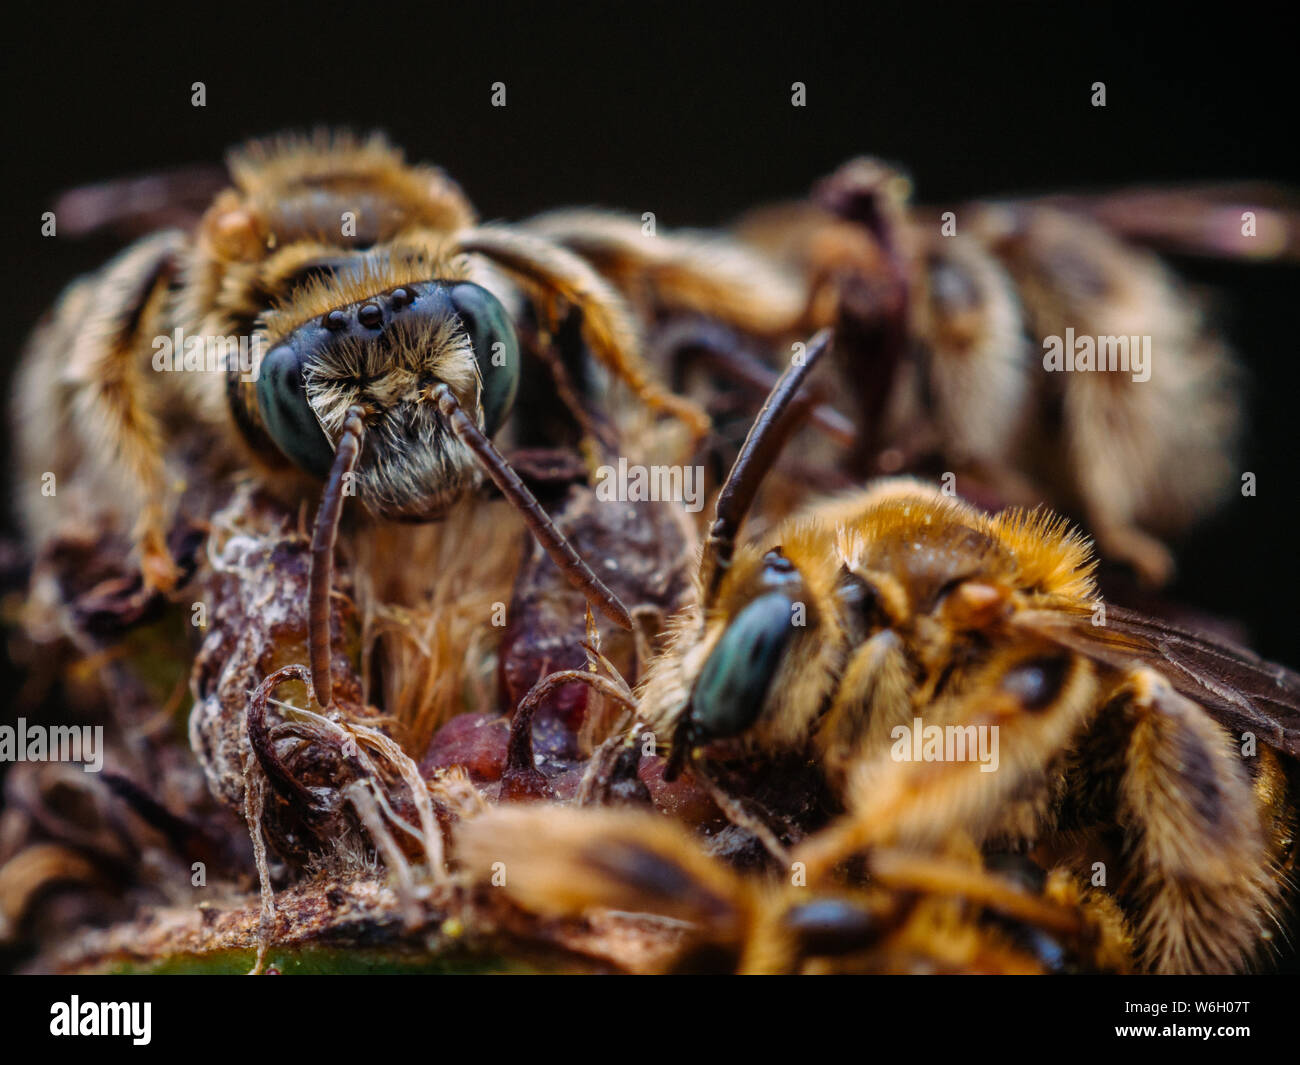 Group of wild bees sleeping together, detailed close-up photo Stock Photo